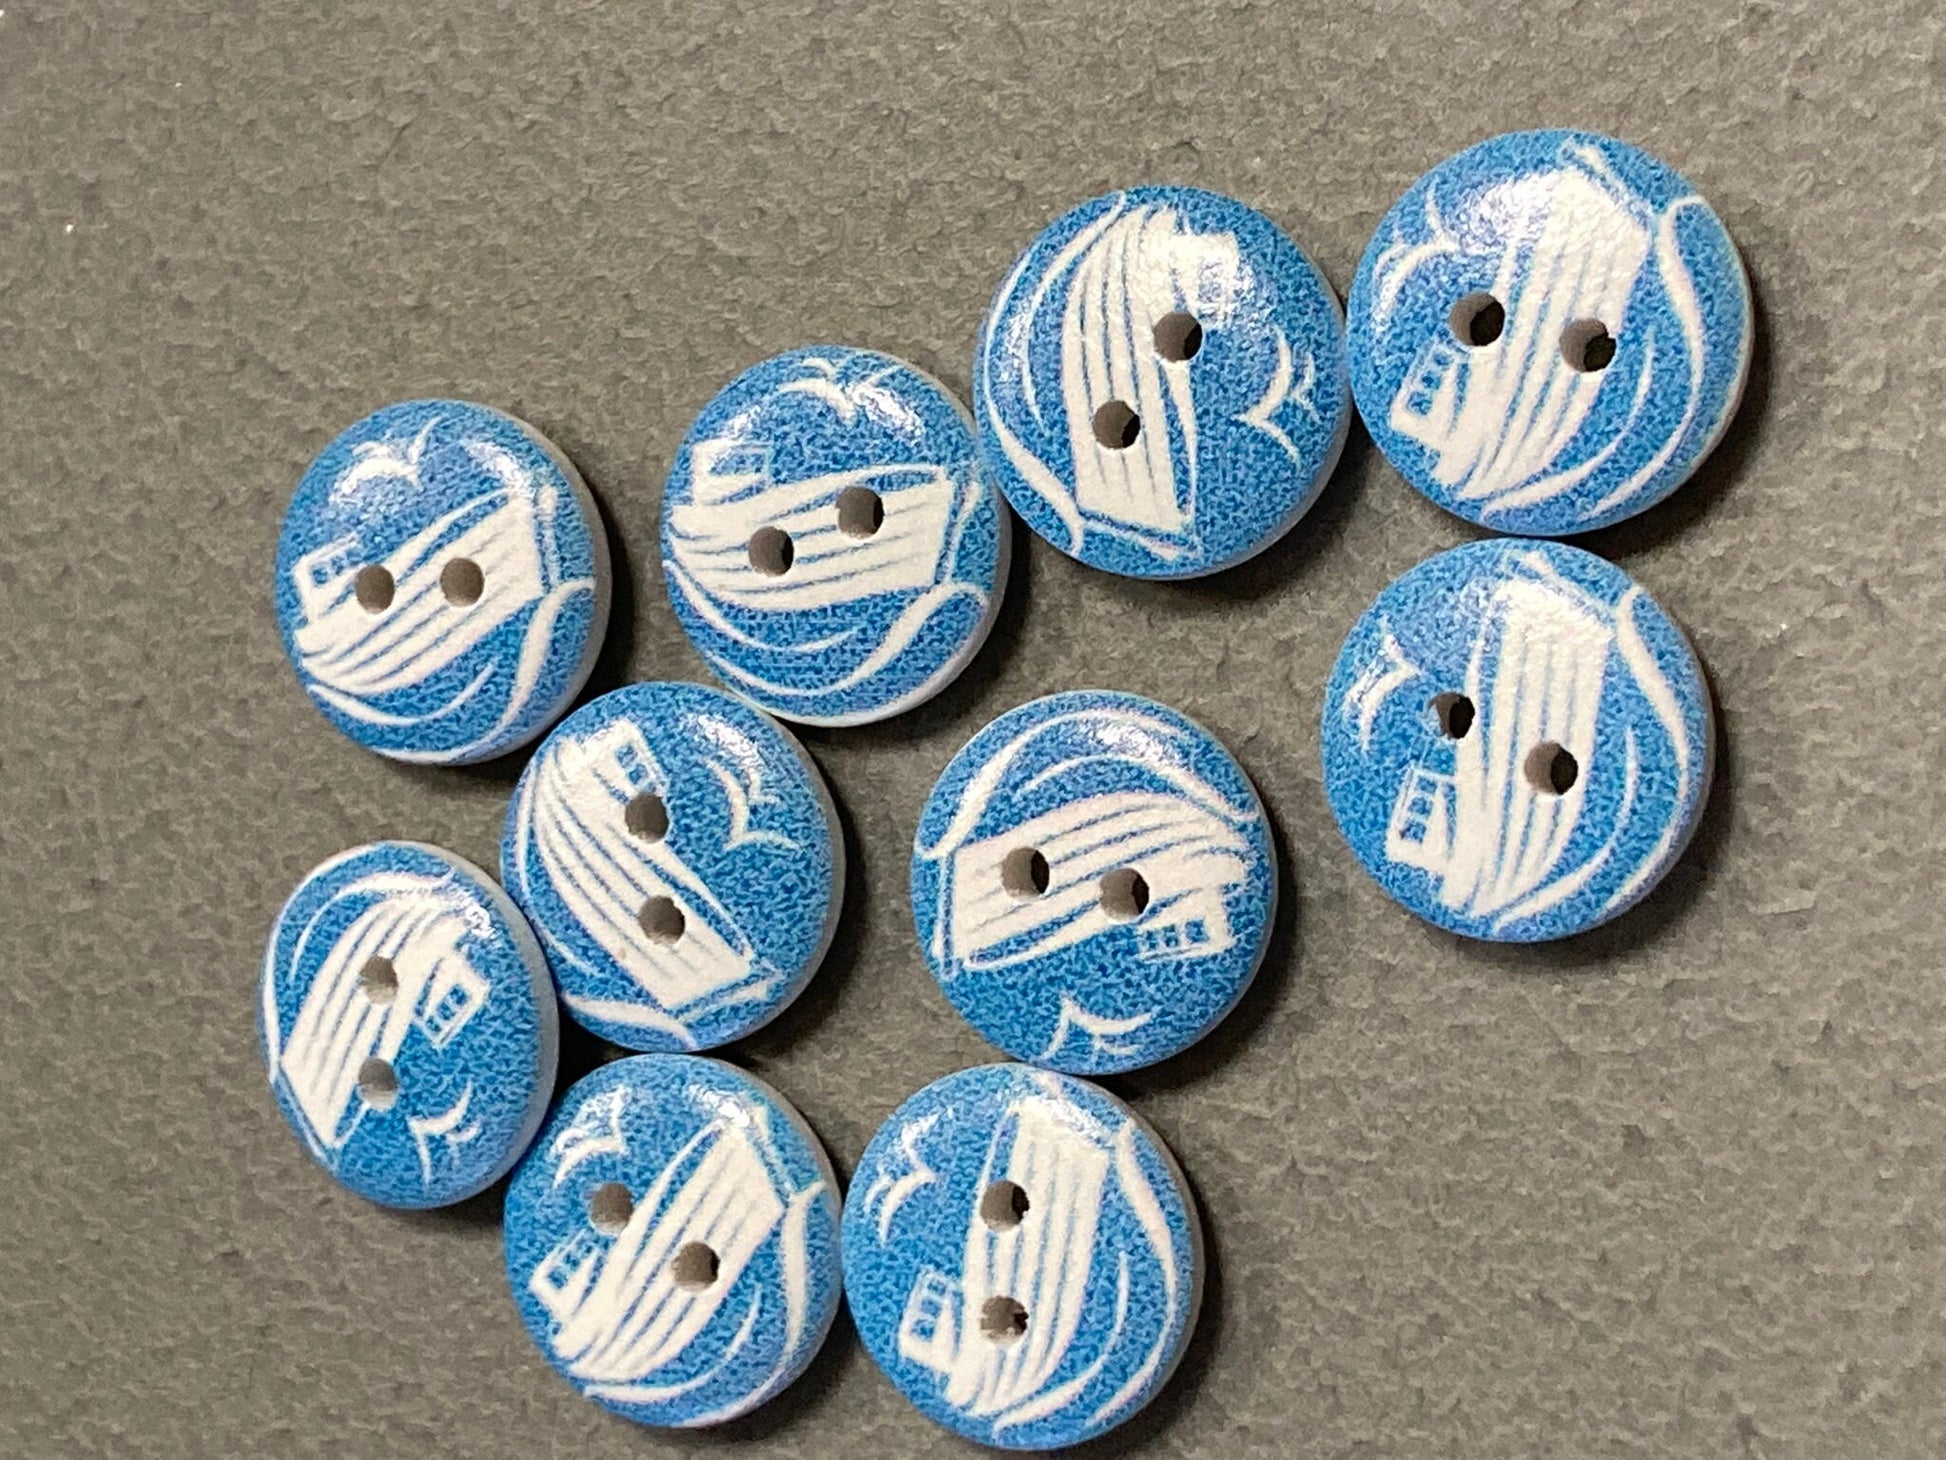 big boat ship 10 buttons x 16mm round plastic Blue & White nautical buttons (all one design)